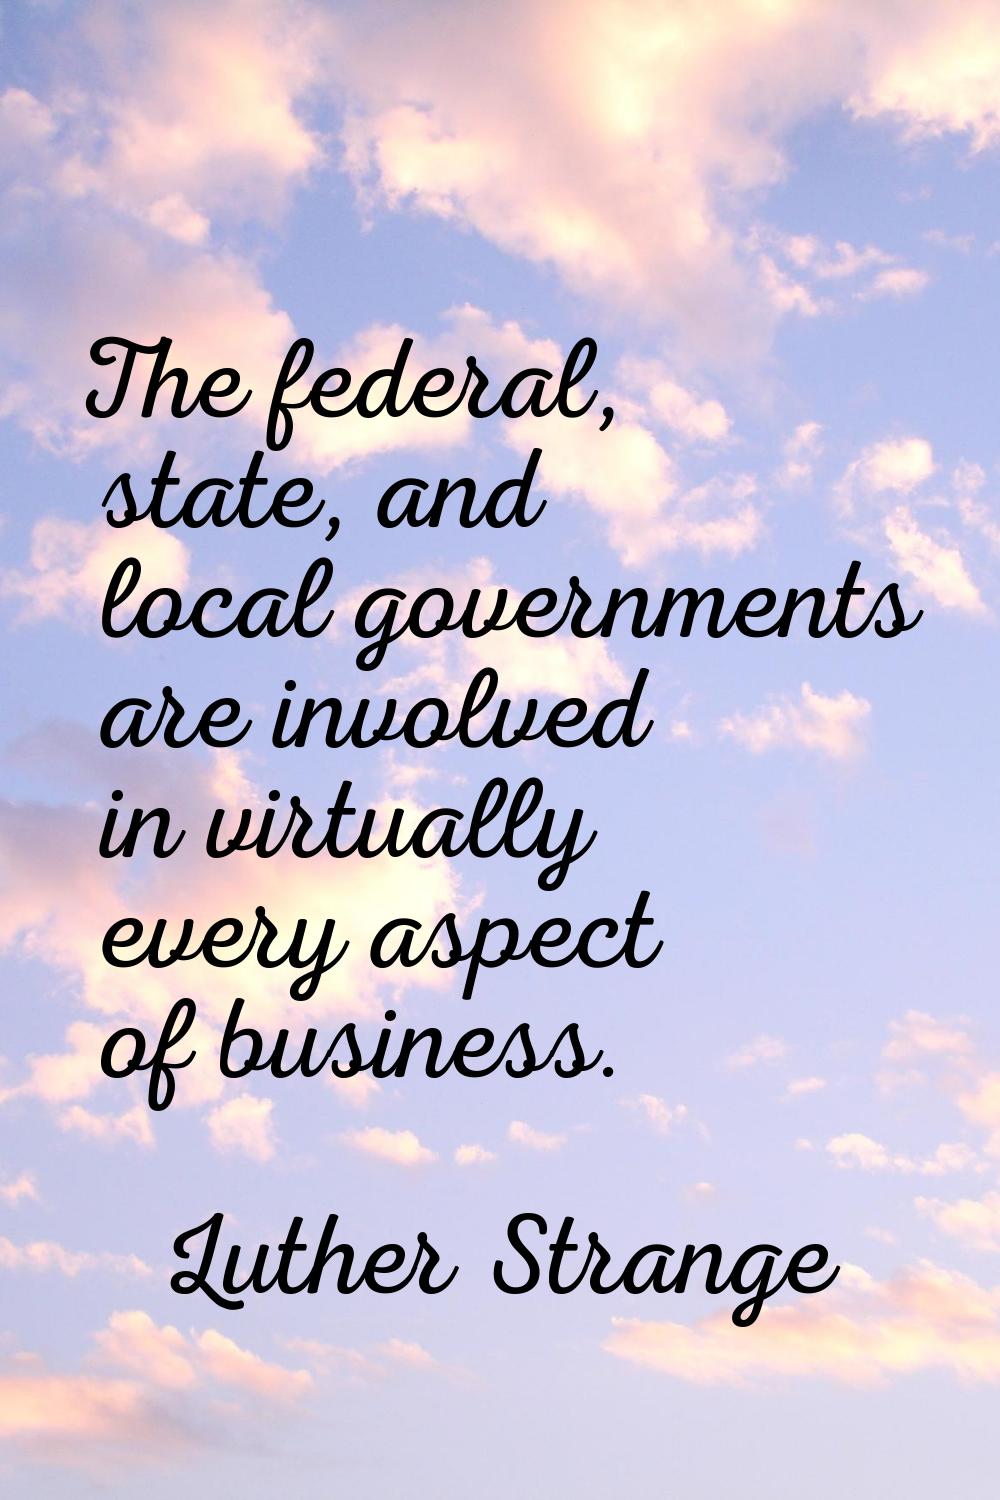 The federal, state, and local governments are involved in virtually every aspect of business.